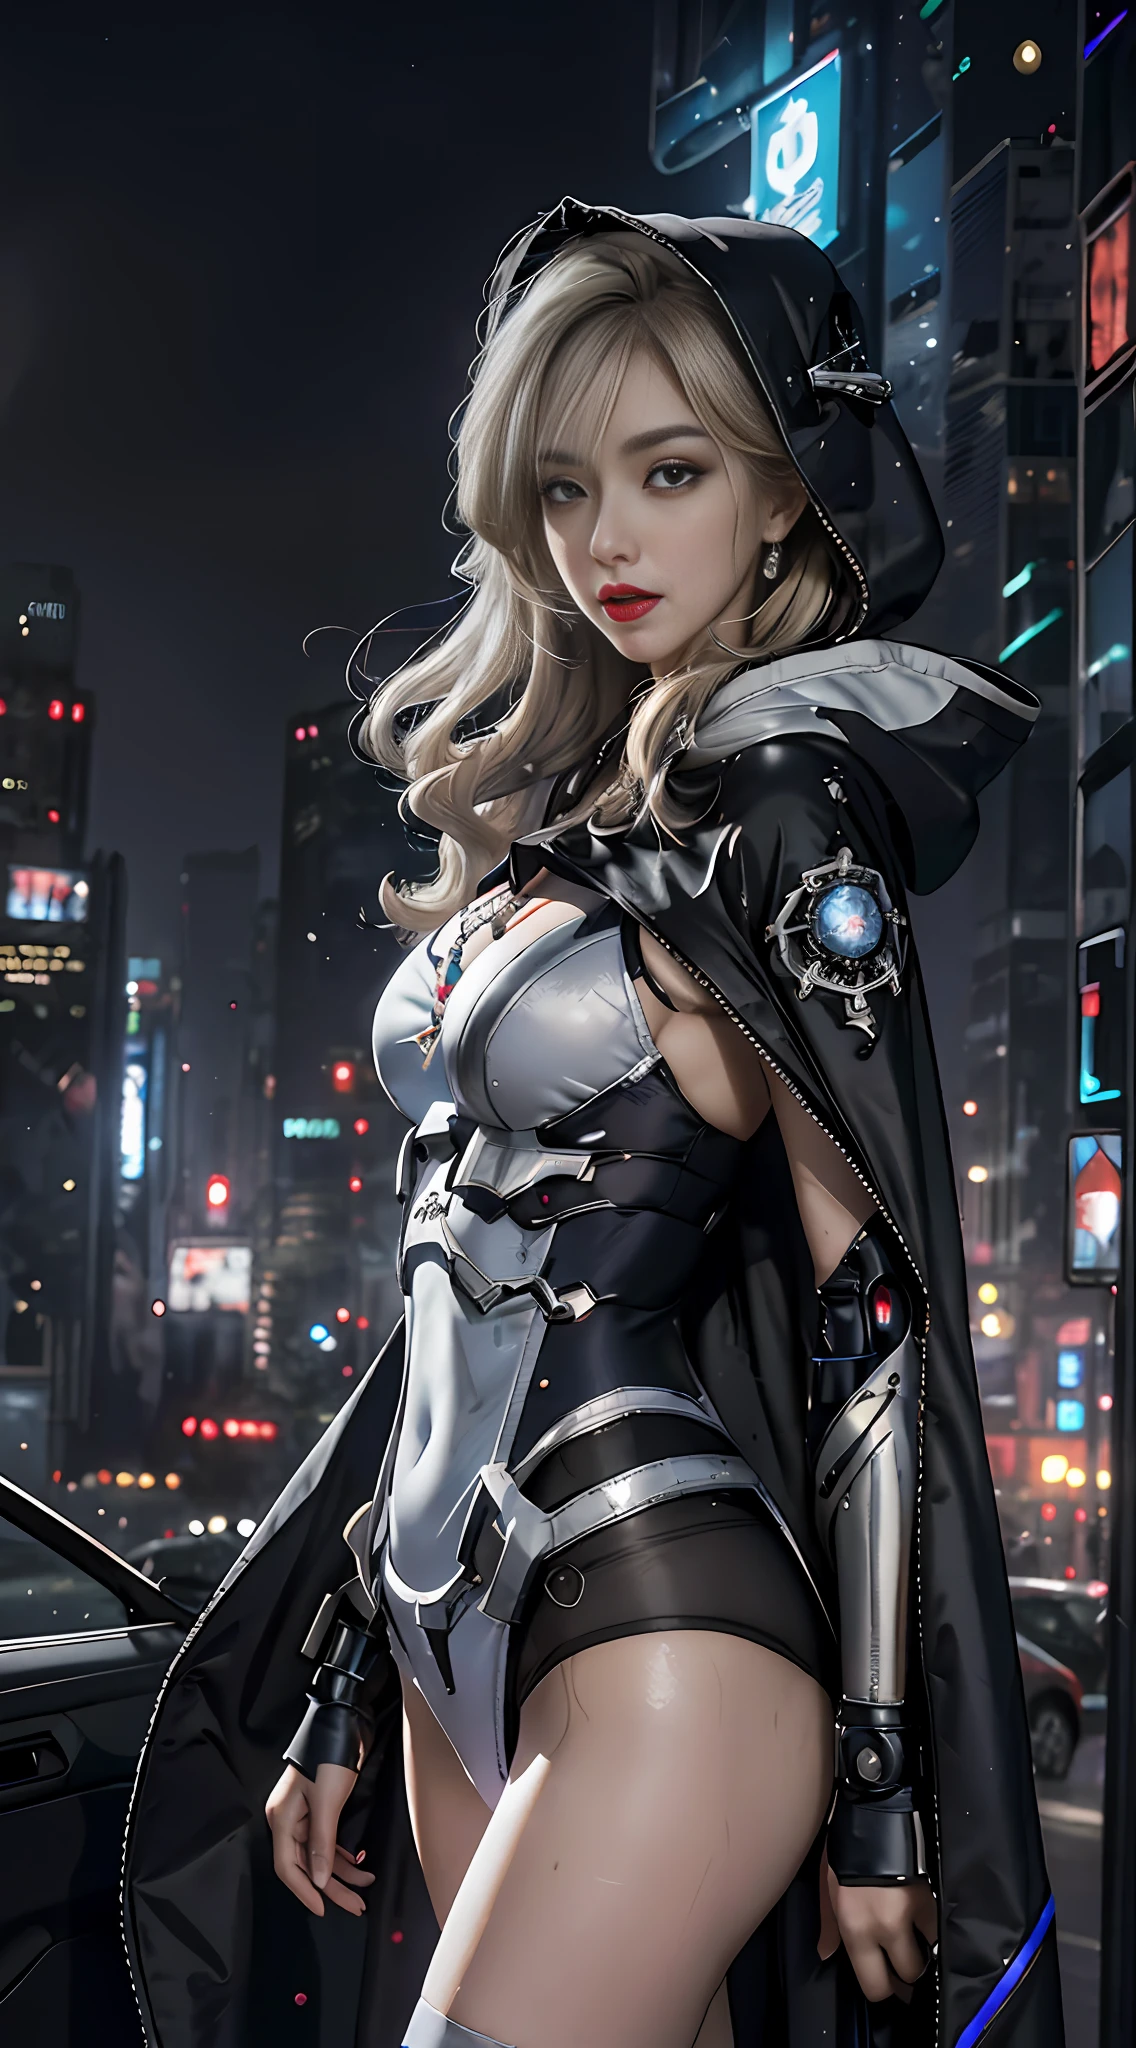 Masterpiece, Best Quality, 4k, Mecha, Starry Sky (Sky), Cape, Hair Ribbon, Super Big, Big Ass, Hood, Long Hair, White Hair, Cyberpunk, Depth of Field (Ultra Realistic), (Blonde Curly), Ponytail, (Super))), ((Plump Body)), (Super Big), (Plump)), (Big Ass)), ((Big Butt)), ((Nipple Exposed))), (Detailed description of hair), (detailed description of the face), (detailed description of the body), (white and translucent skin), incomparable beauty, (extreme beauty), (without underwear))), ((stockings)), (less clothes), (very few clothes), (dark blue lace underwear))), (ruby necklace), (jewelry earrings), ((stockings)), beauty mole, (mature royal), (red lips), ( touching), (seductive seduction smile), (facing the viewer)), ((night)), (breast close-up)), (close-up)), ((lying on the couch)), (hands placed behind the head)), ((without panties)), (spread legs)))), (((sweating))),